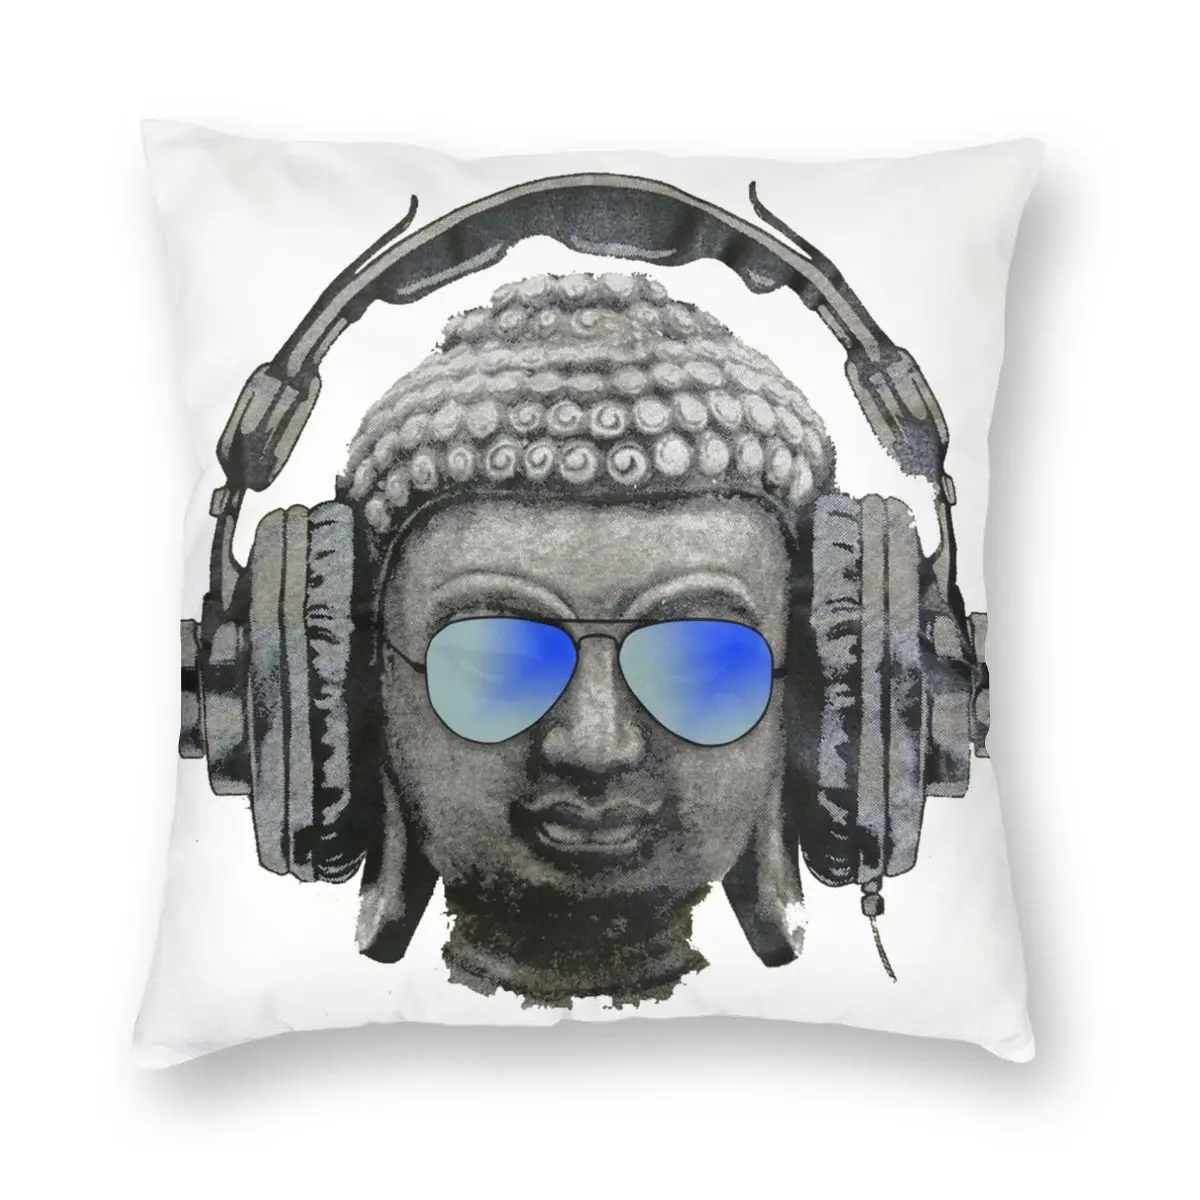 

Headphones Groove Buddha Banksy Pillowcase Soft Polyester Cushion Cover Decorations Hip Hop Throw Pillow Case Cover Home 40X40cm